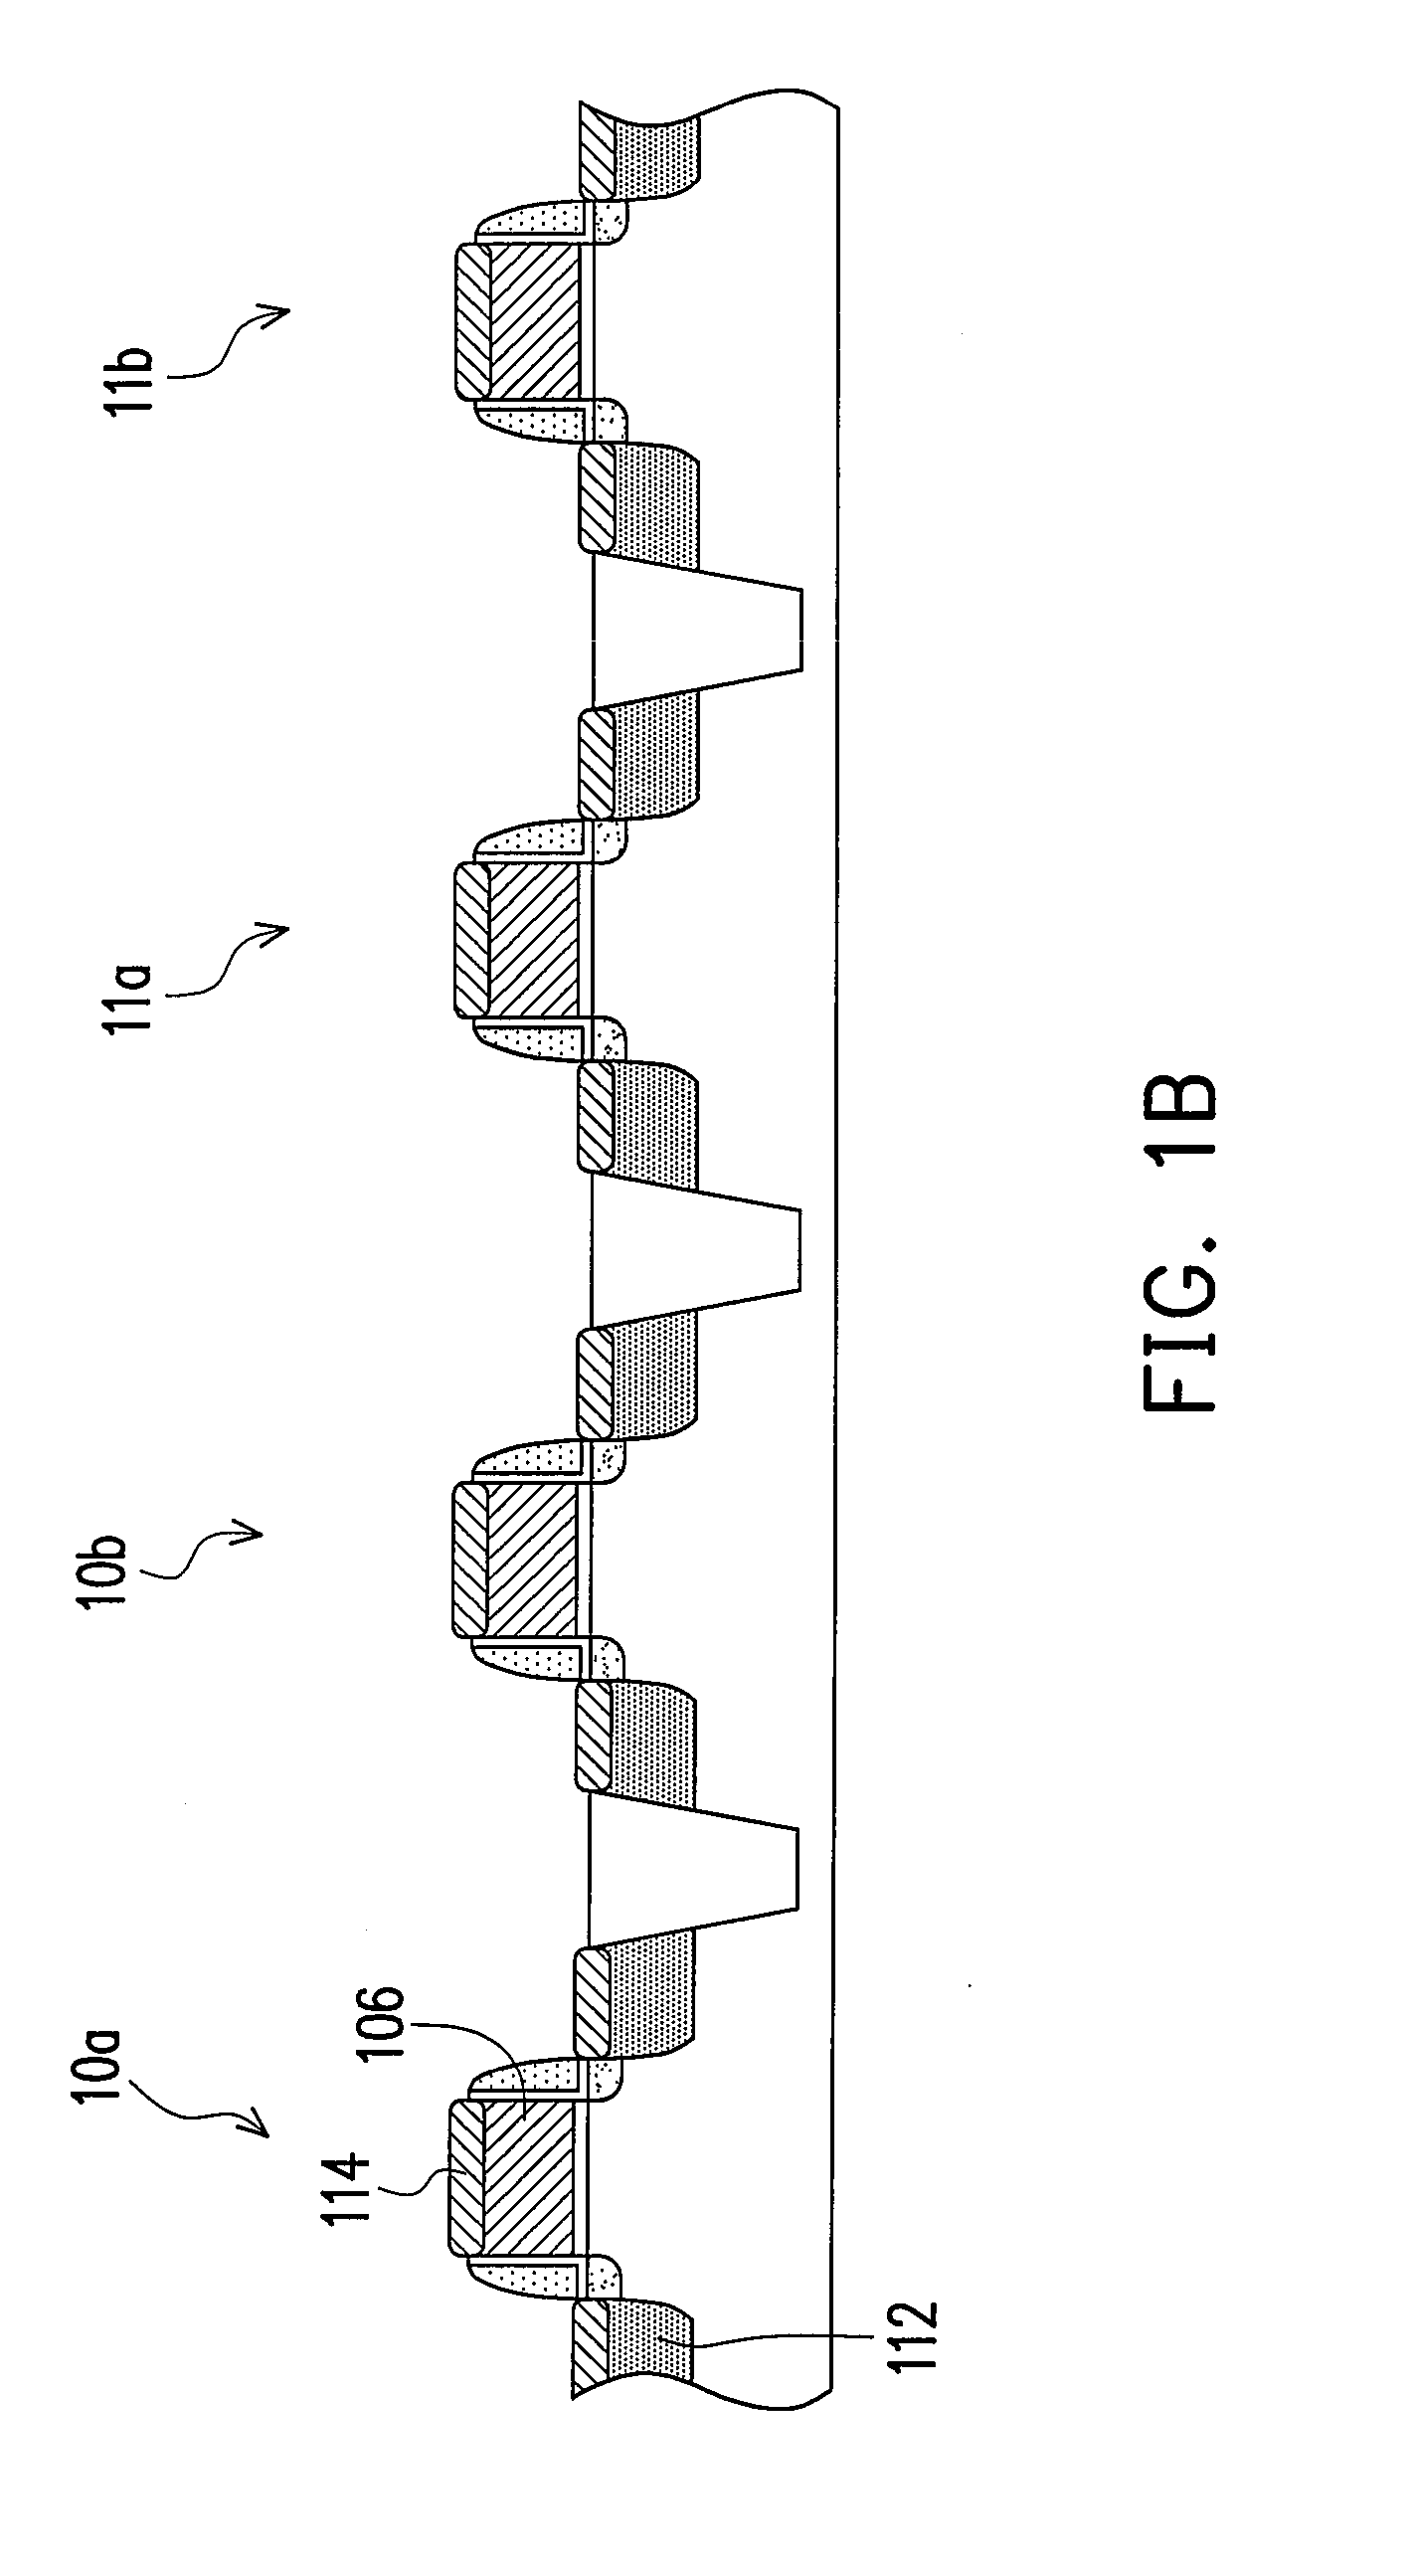 Semiconductor device and method of fabricating thereof